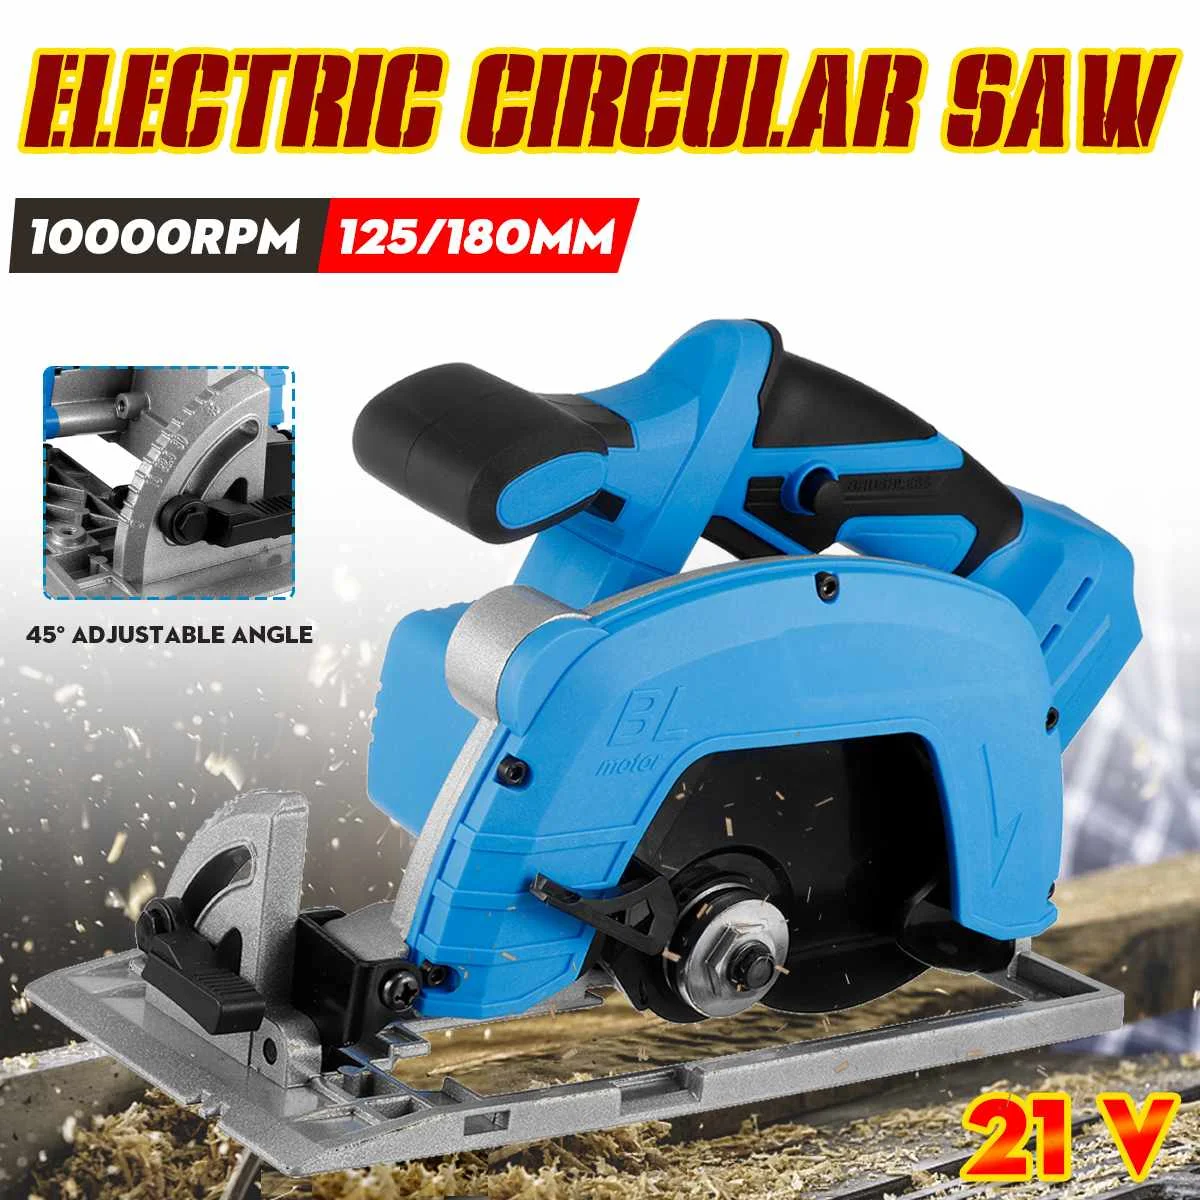 

1200W 7Inch Electric Circular Saw Handle Power Tools Dust Passage 10000RPM Multifunction Cutting Machine For Makita 21V Battery